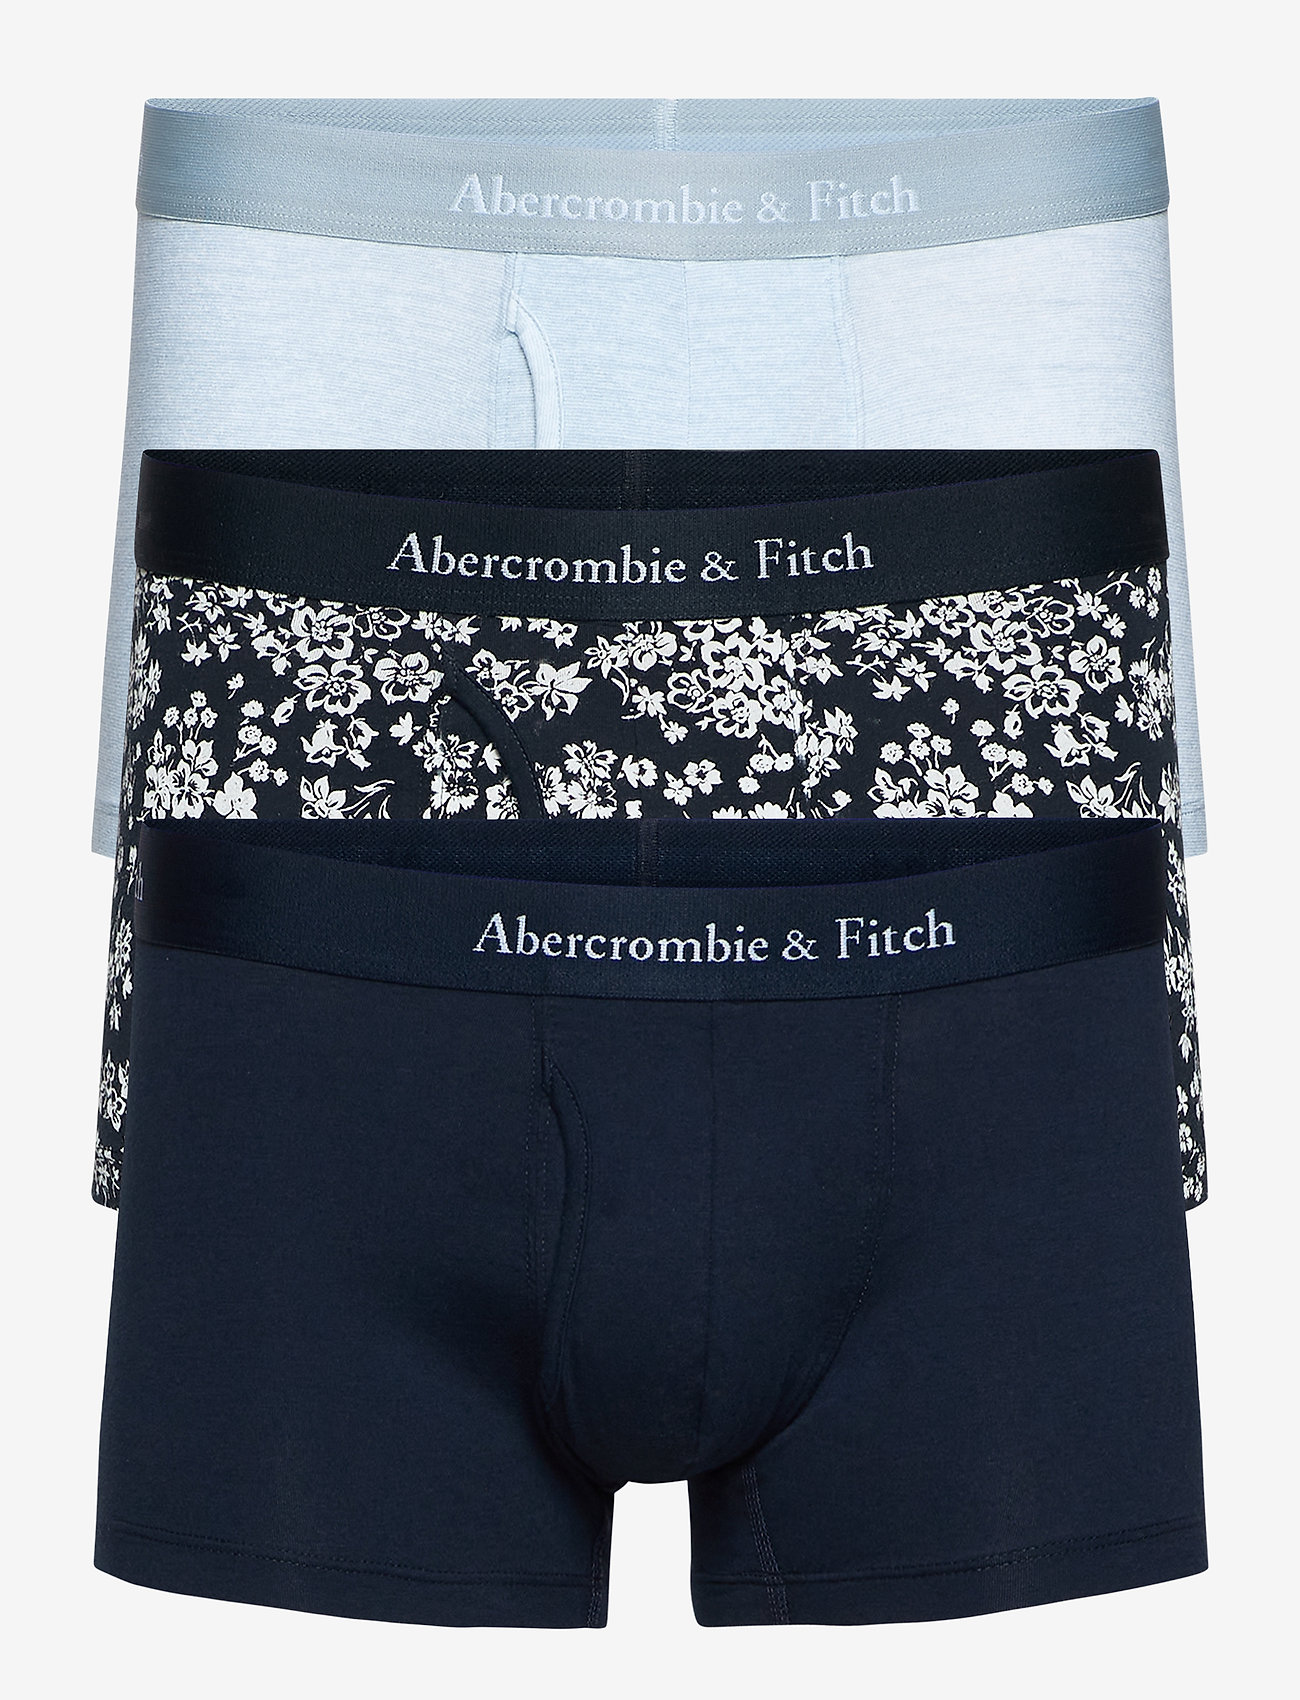 abercrombie fitch boxers